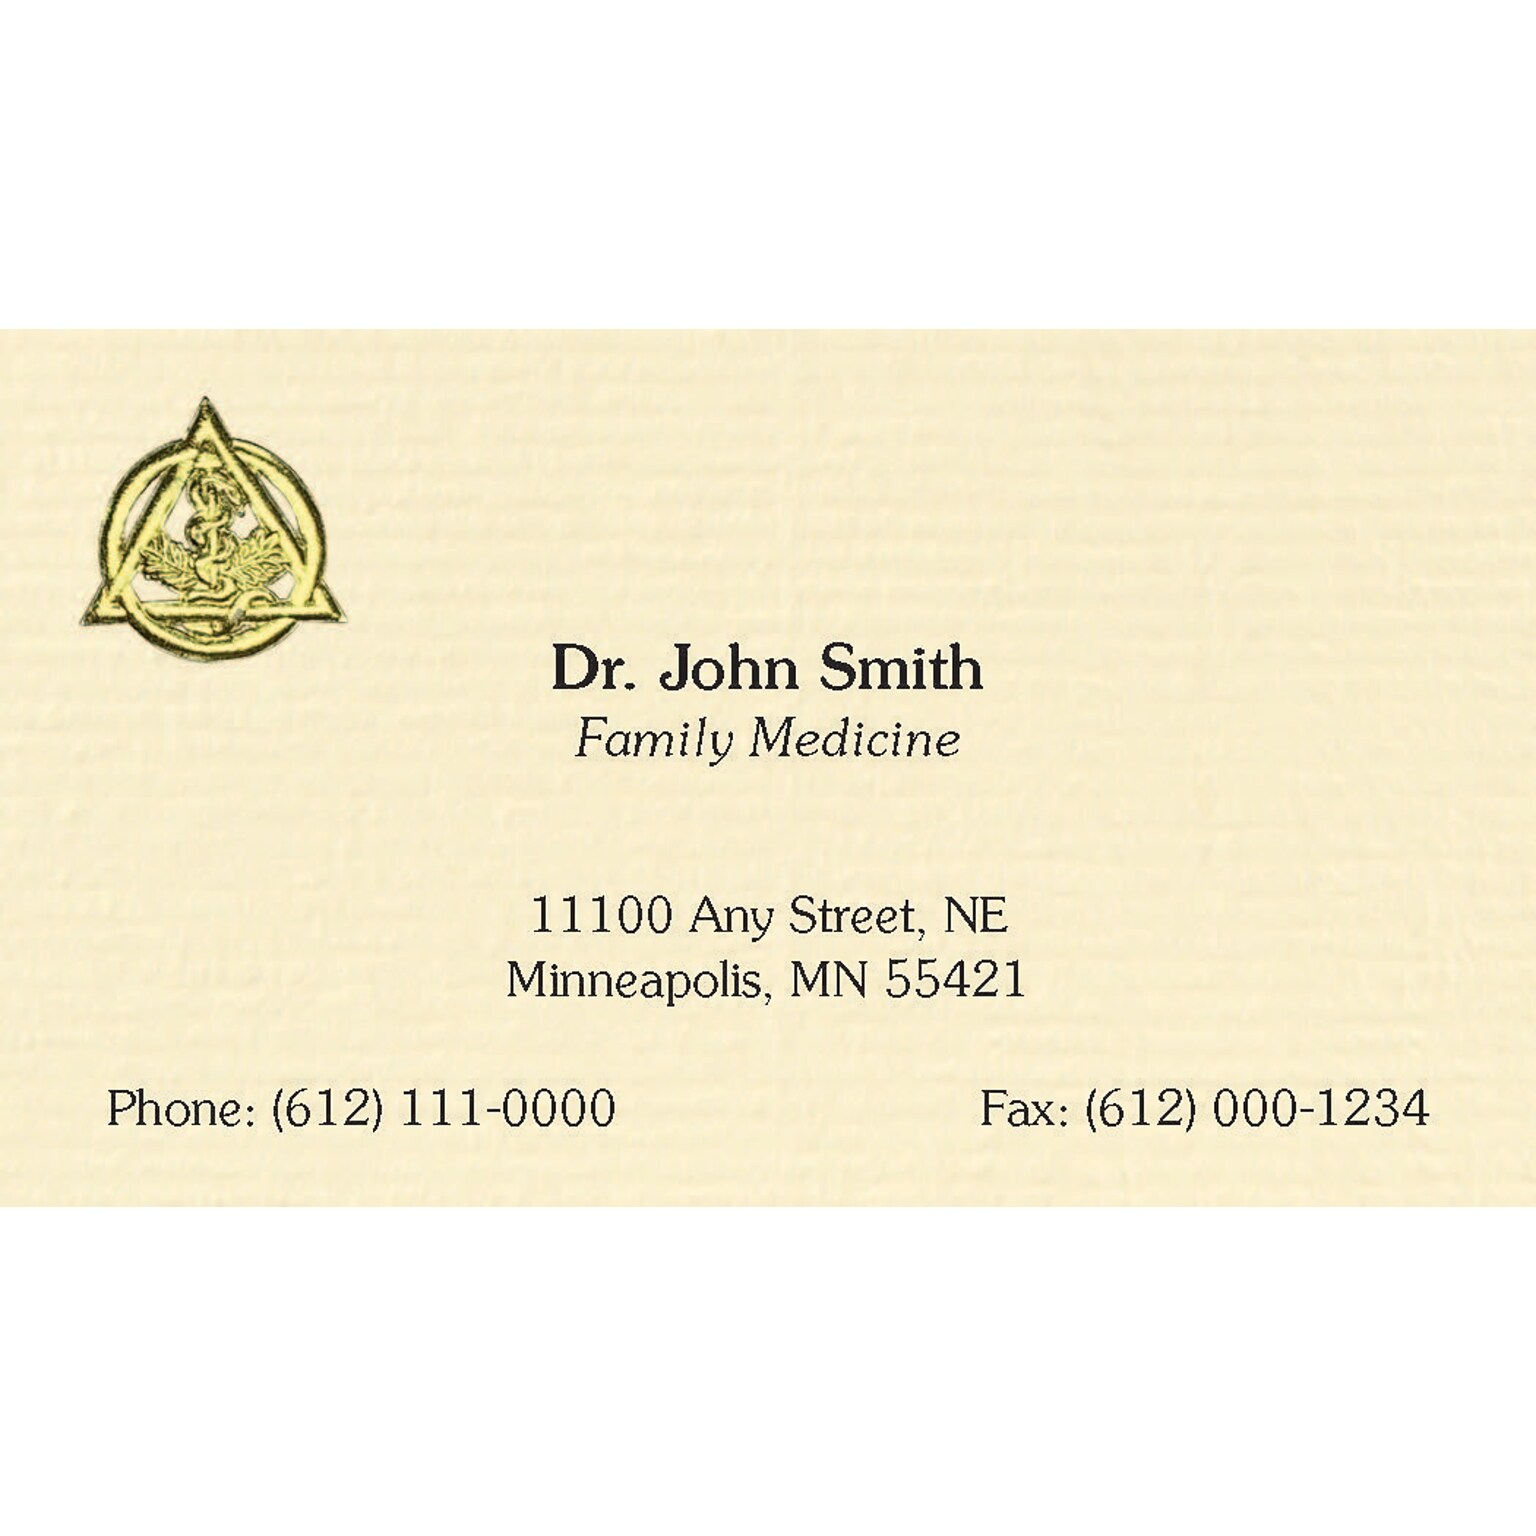 Custom Gold Foil Embossed Business Cards, CLASSIC® Ivory Laid 80#, Flat Ink, 1 Standard Ink, 1-Sided, Logo 207, 250/PK